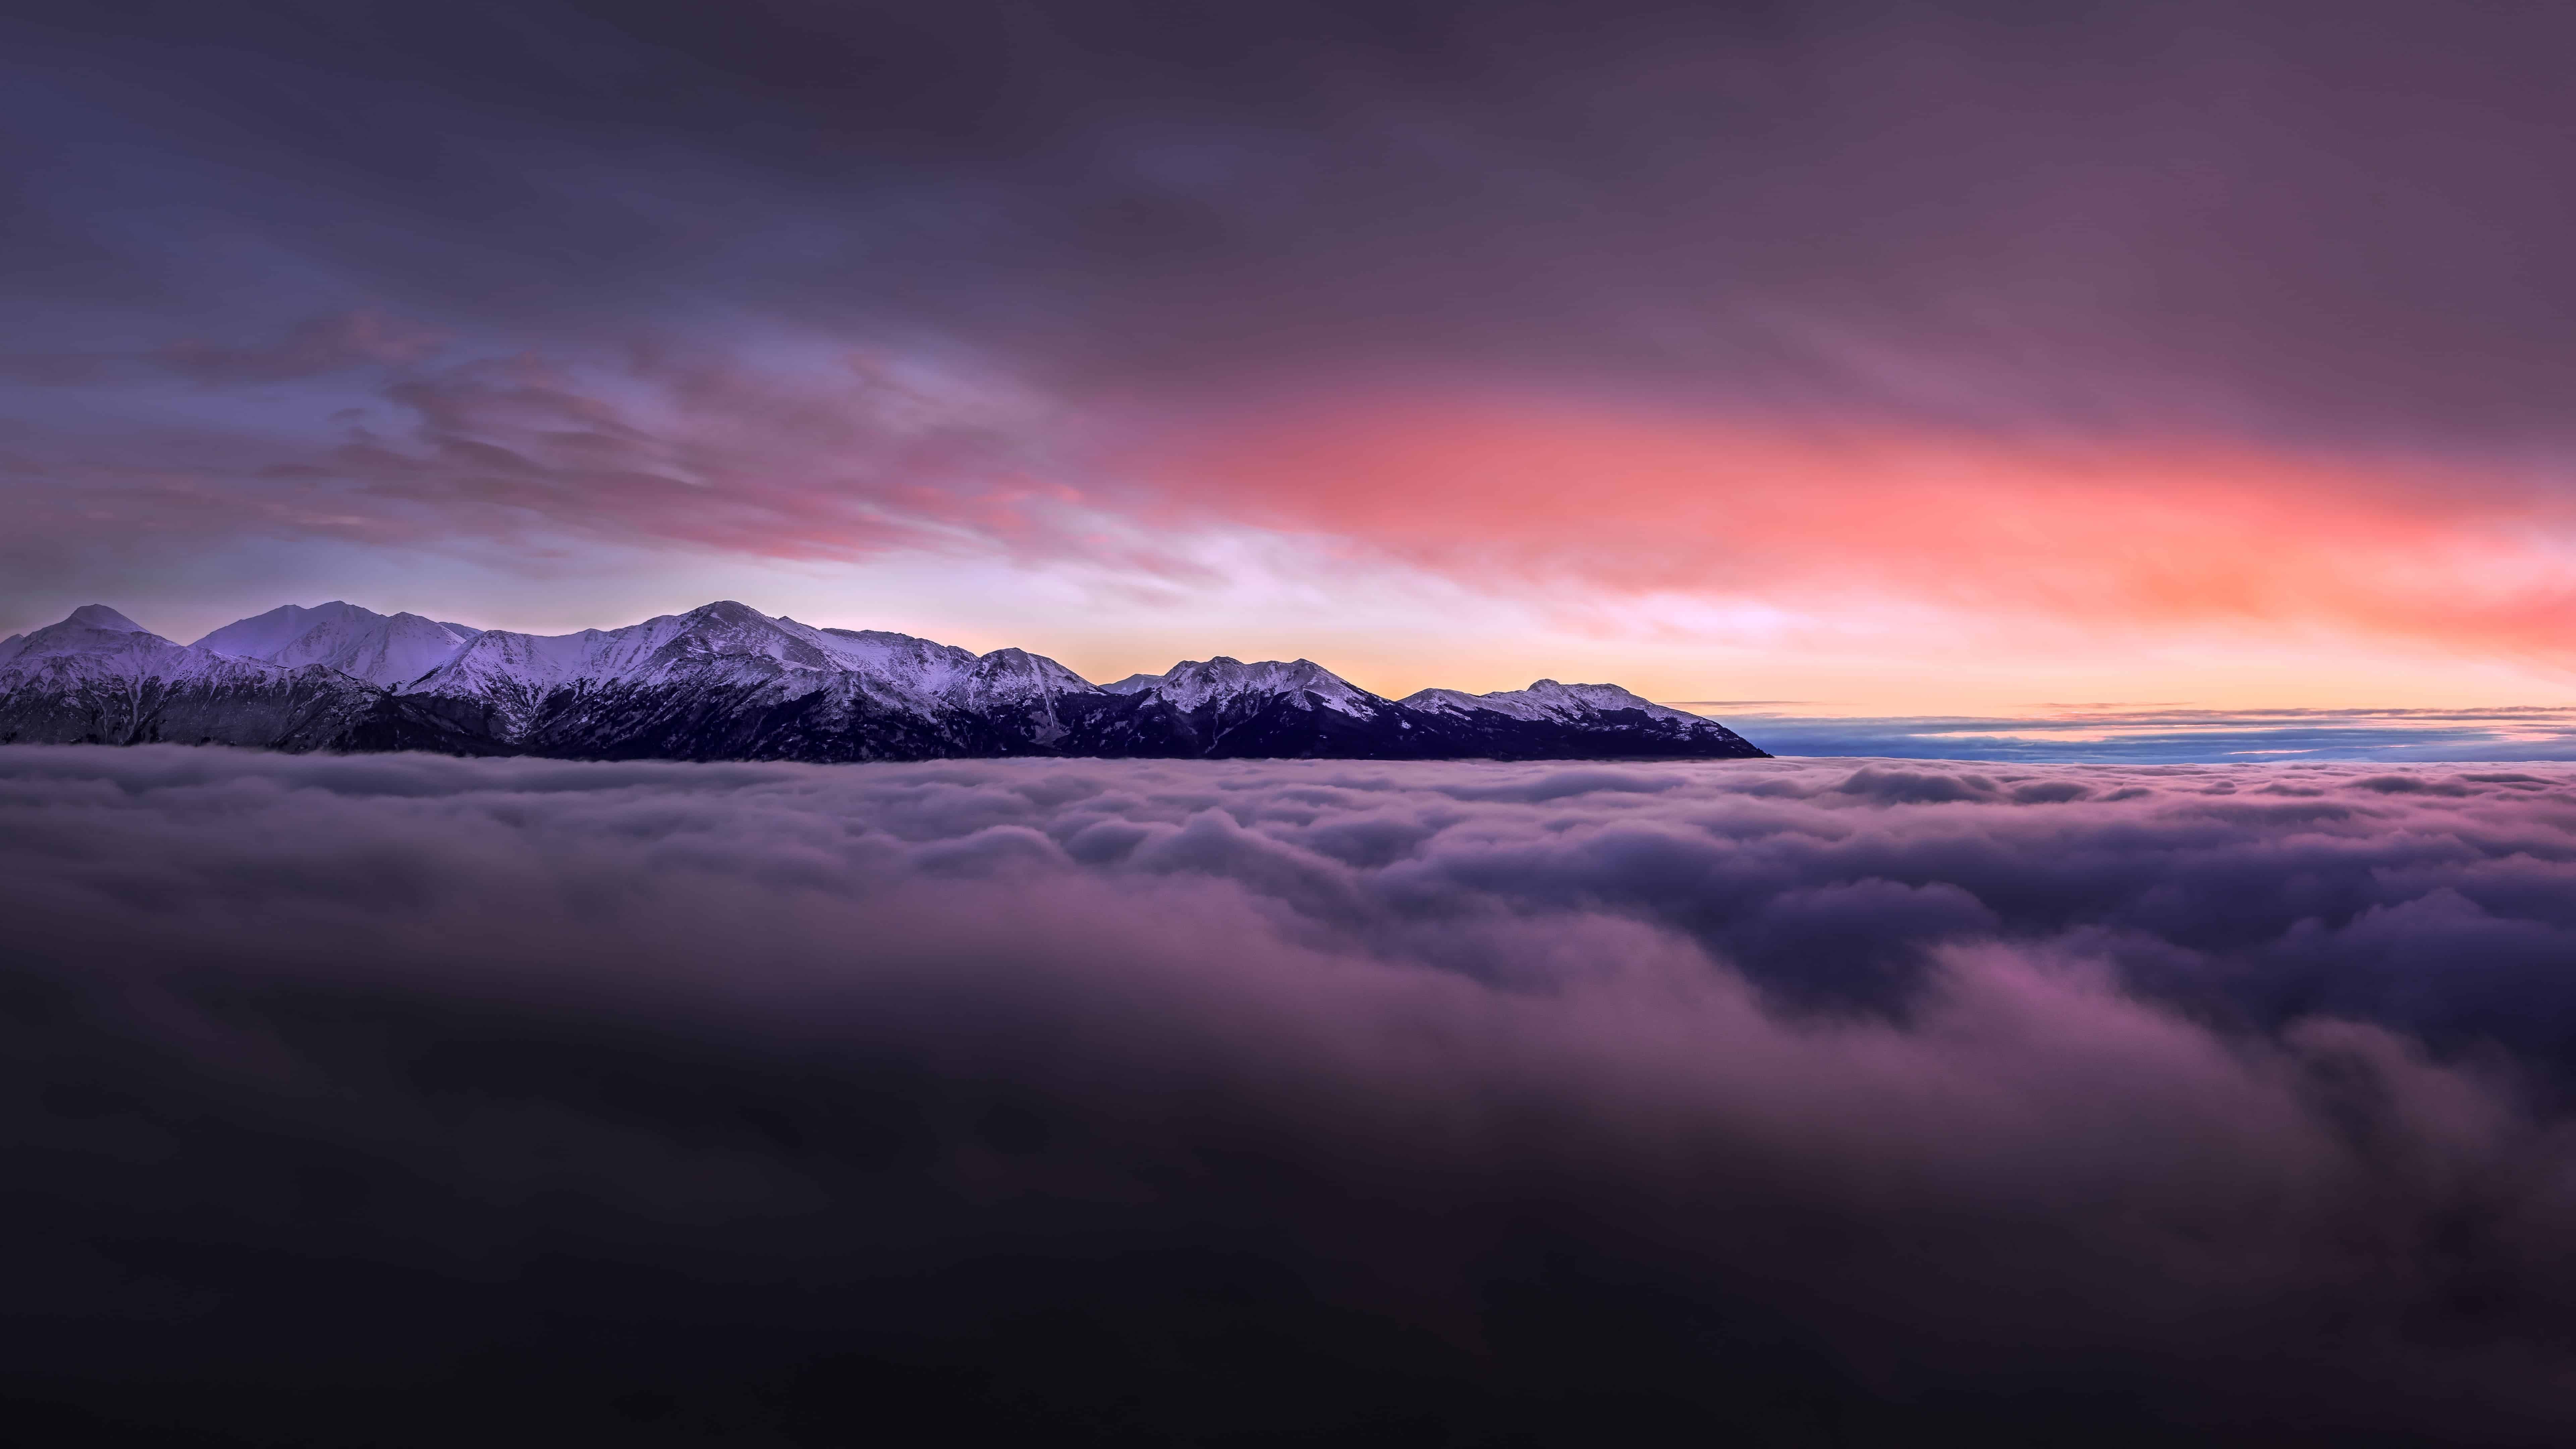 Sunset With Mountains Above Clouds. Wallpaper pc, Cool wallpaper for pc, Cool wallpaper